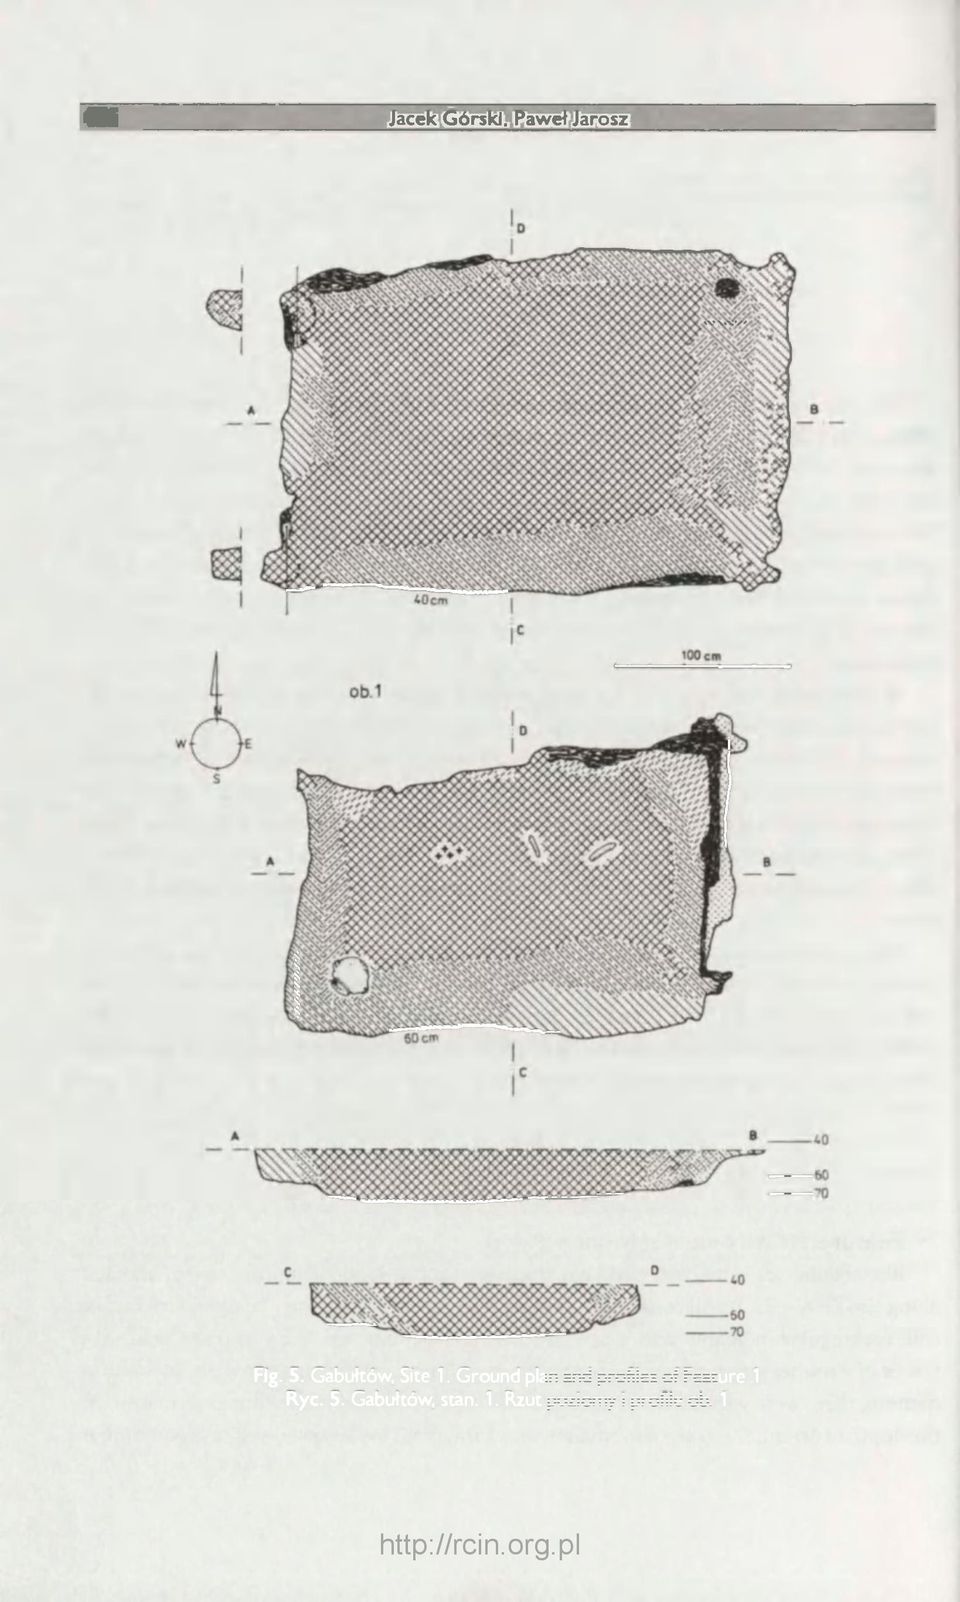 Ground plan and profiles of Feature 1